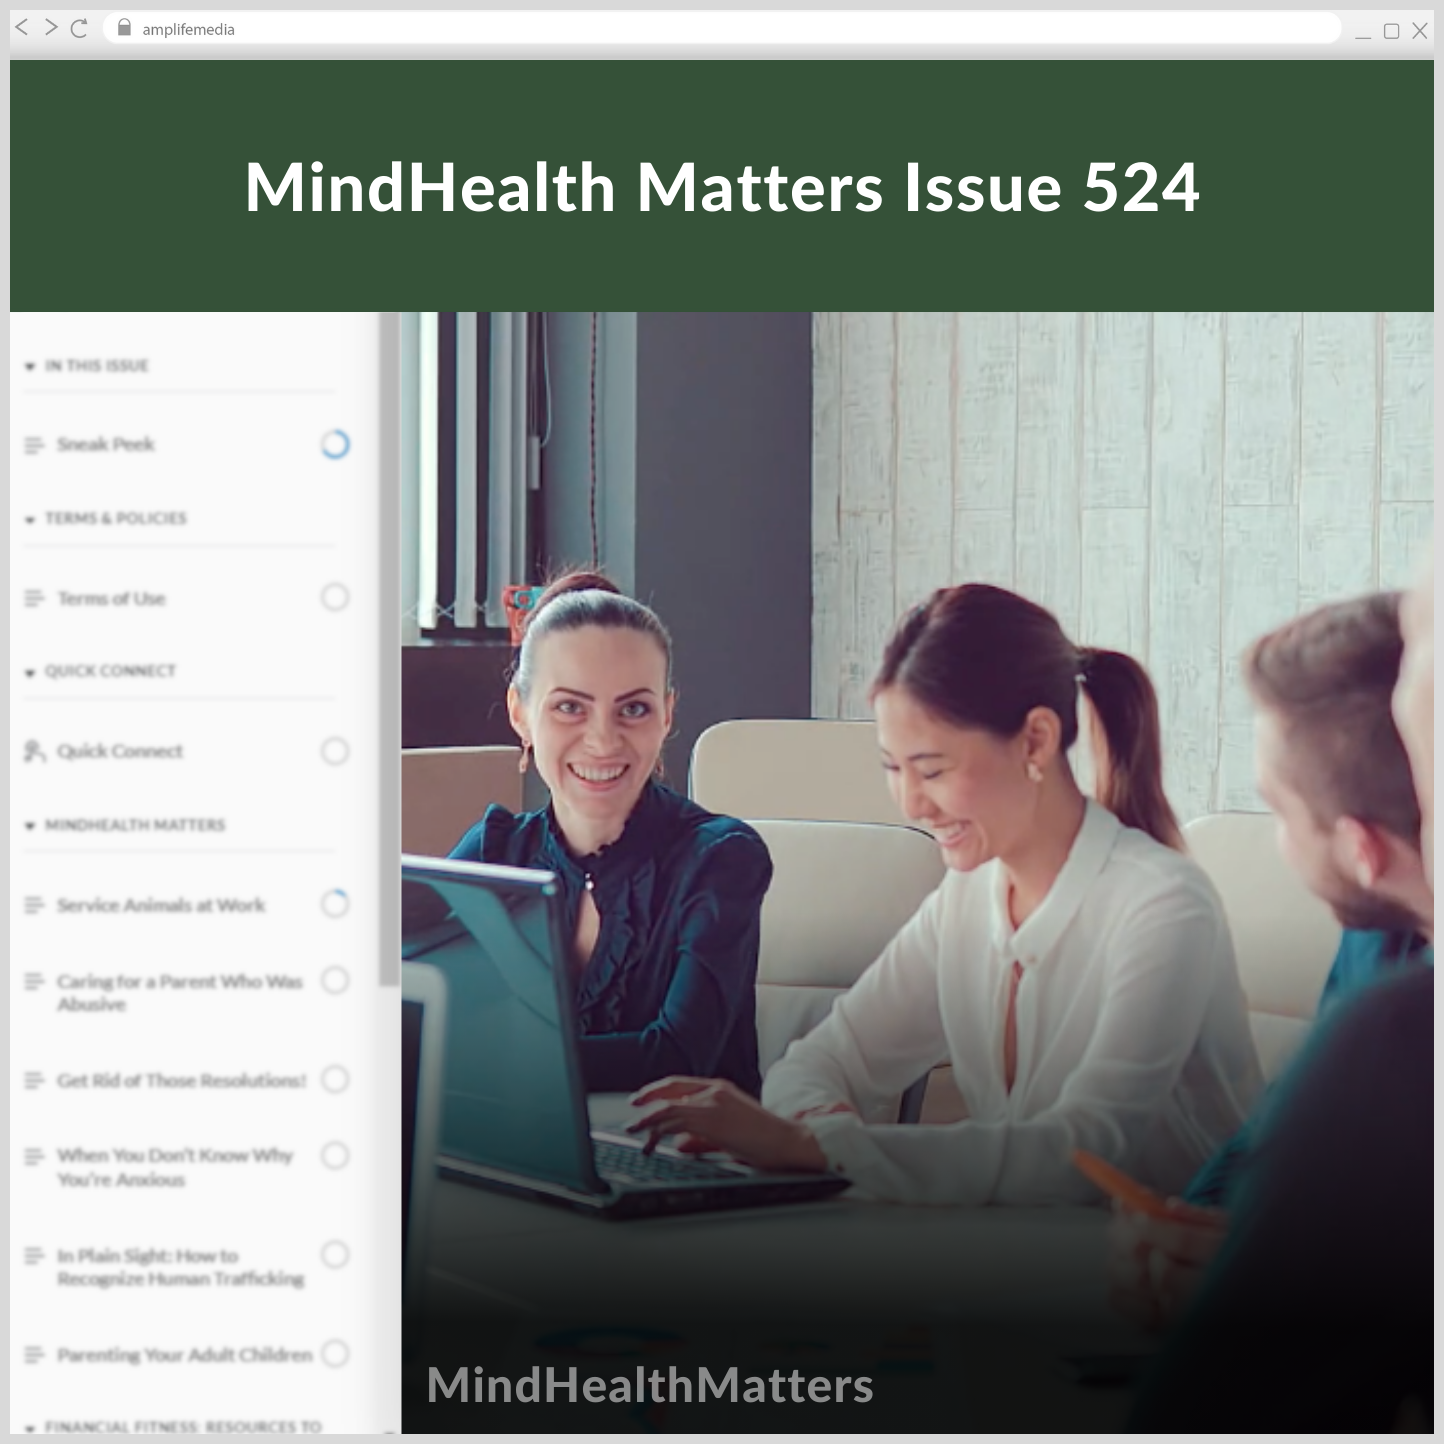 Subscription to Wellbeing Media: MindHealth Matters 524